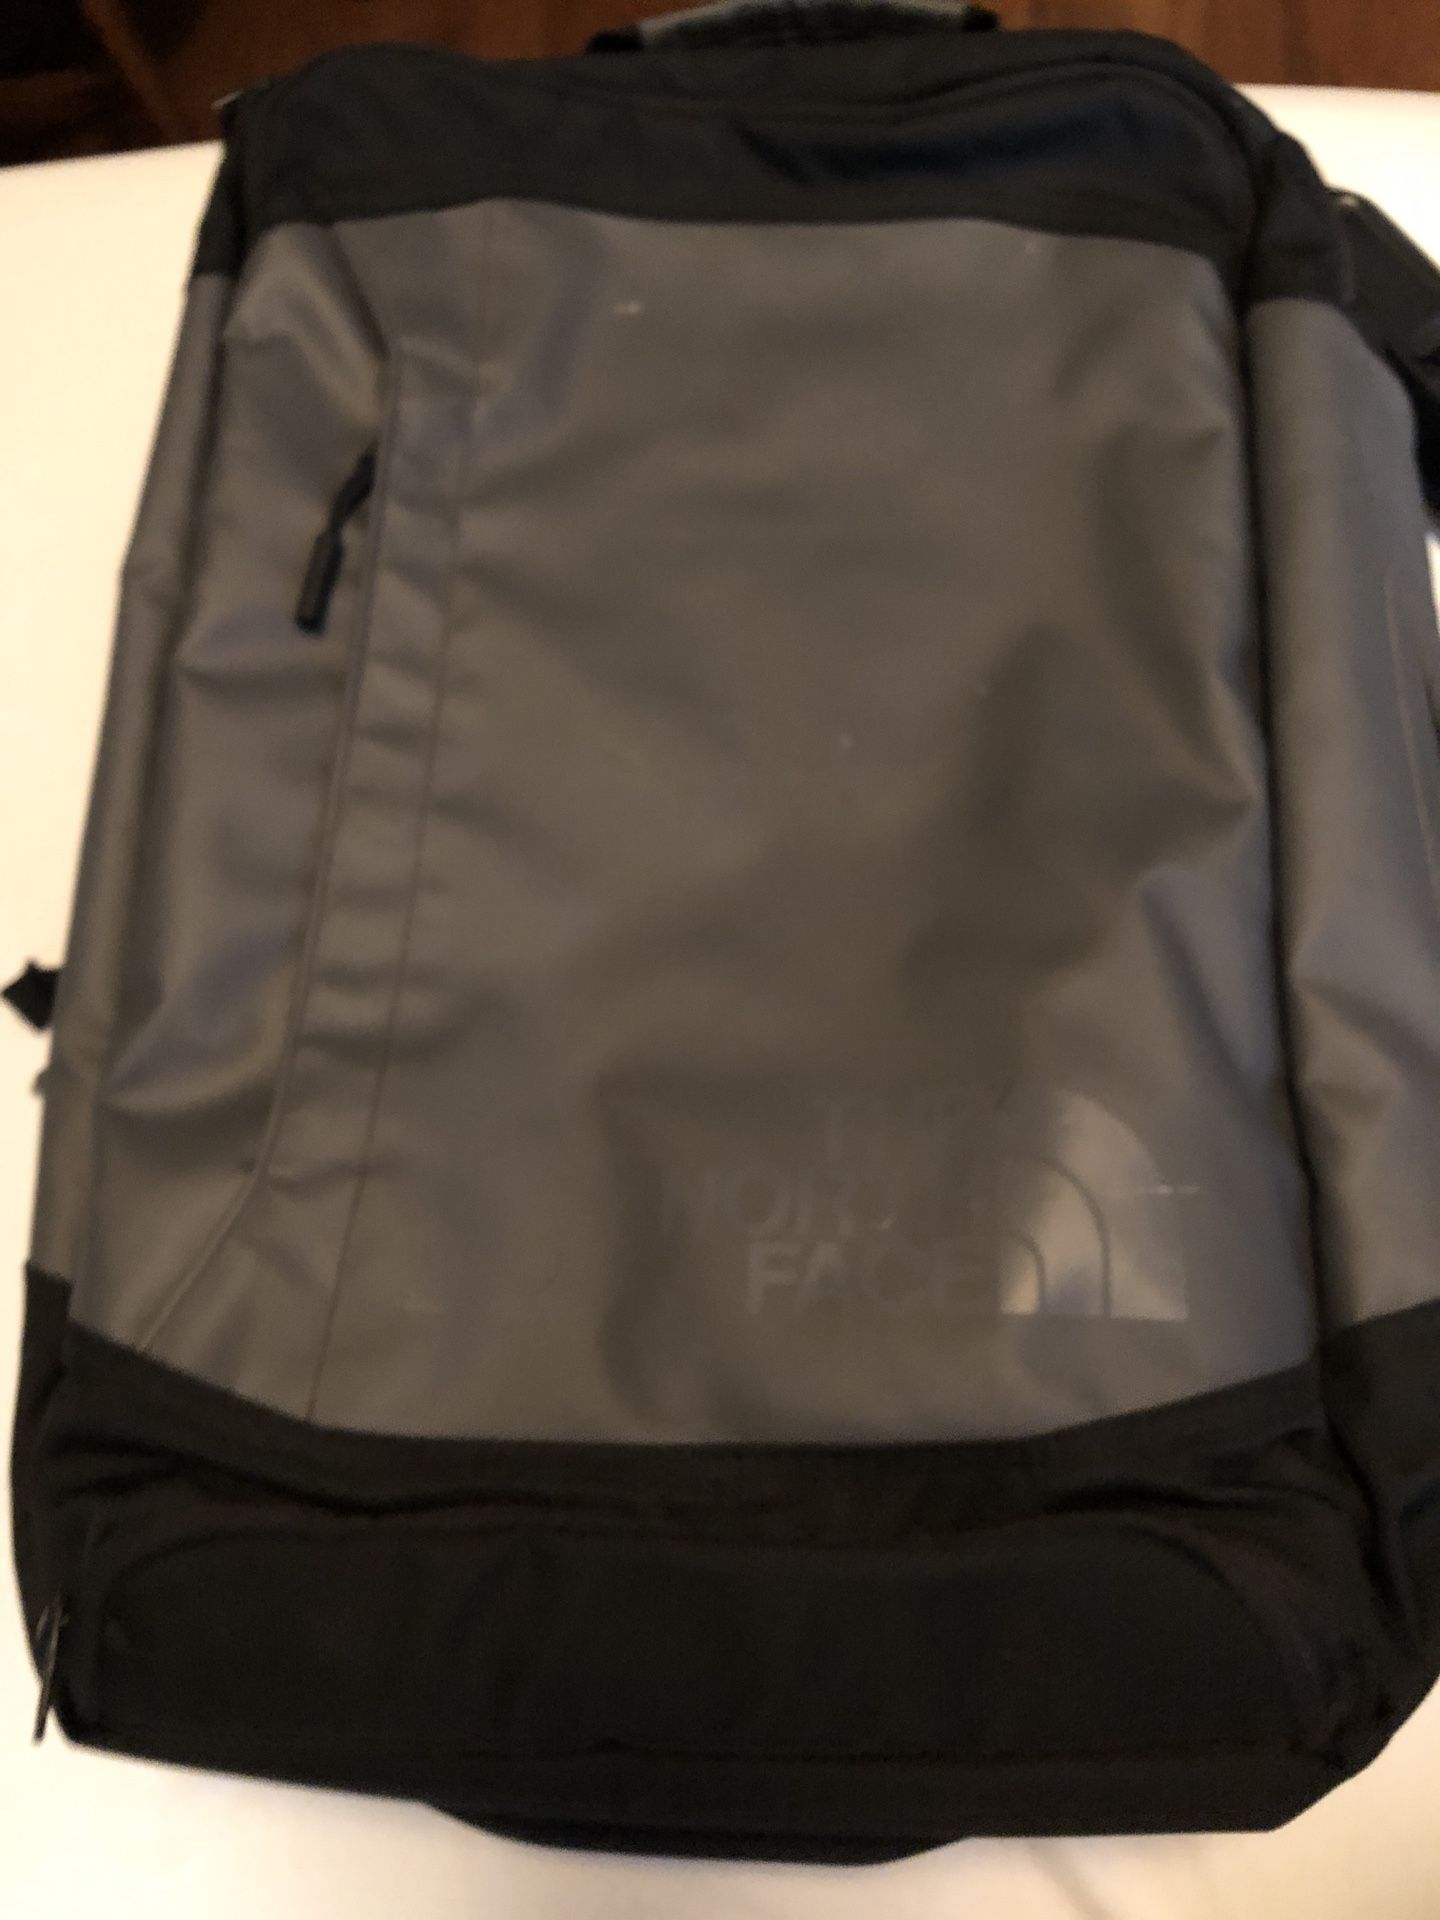 North Face laptop backpack